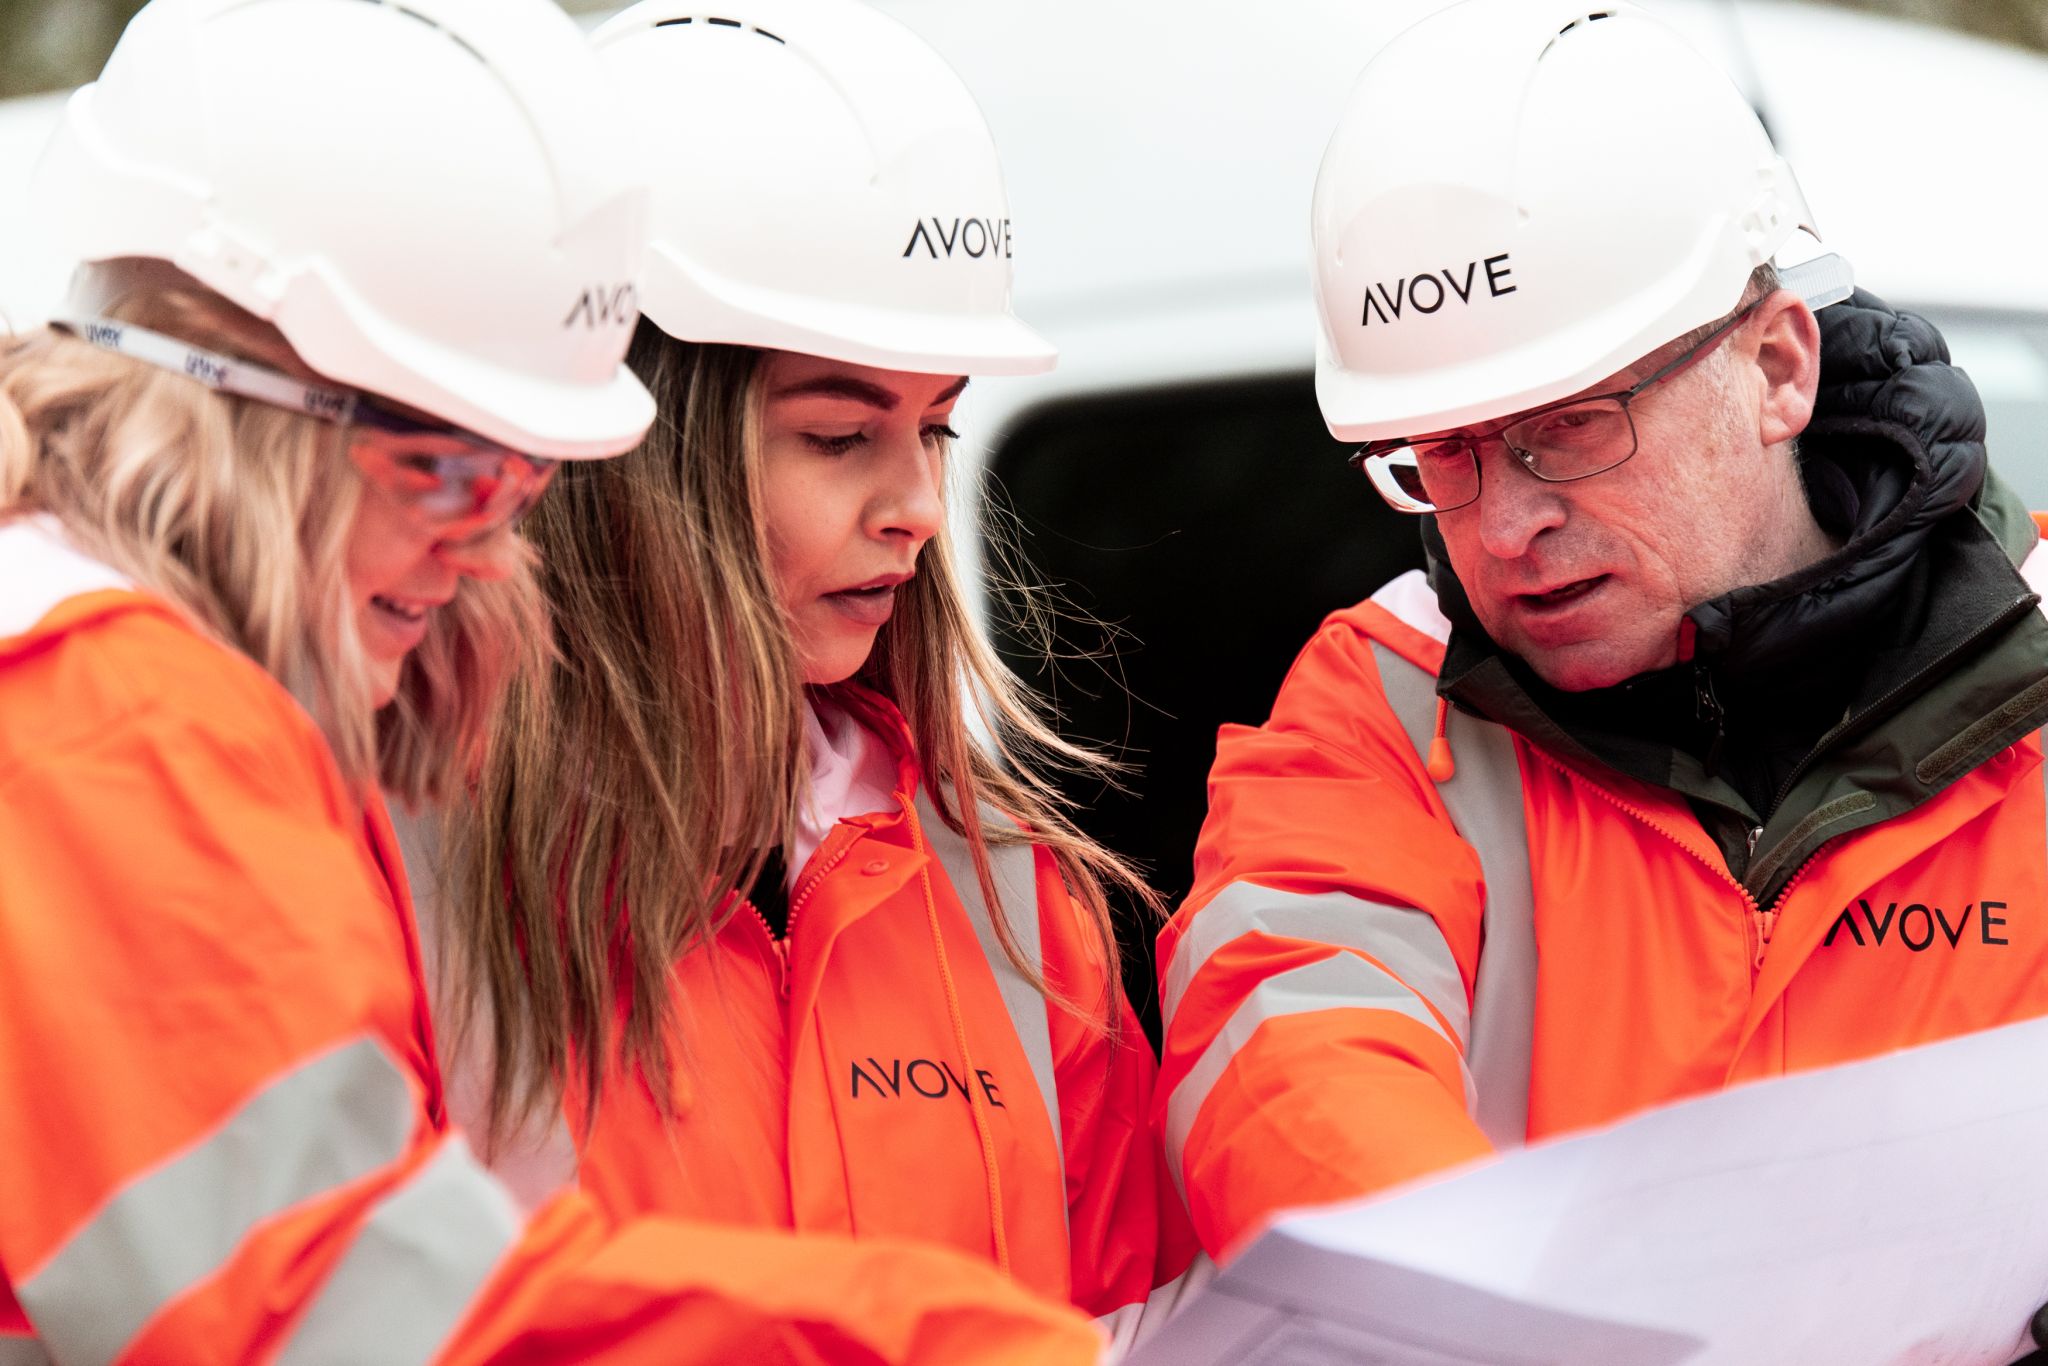 Amey Utilities sold and renamed Avove